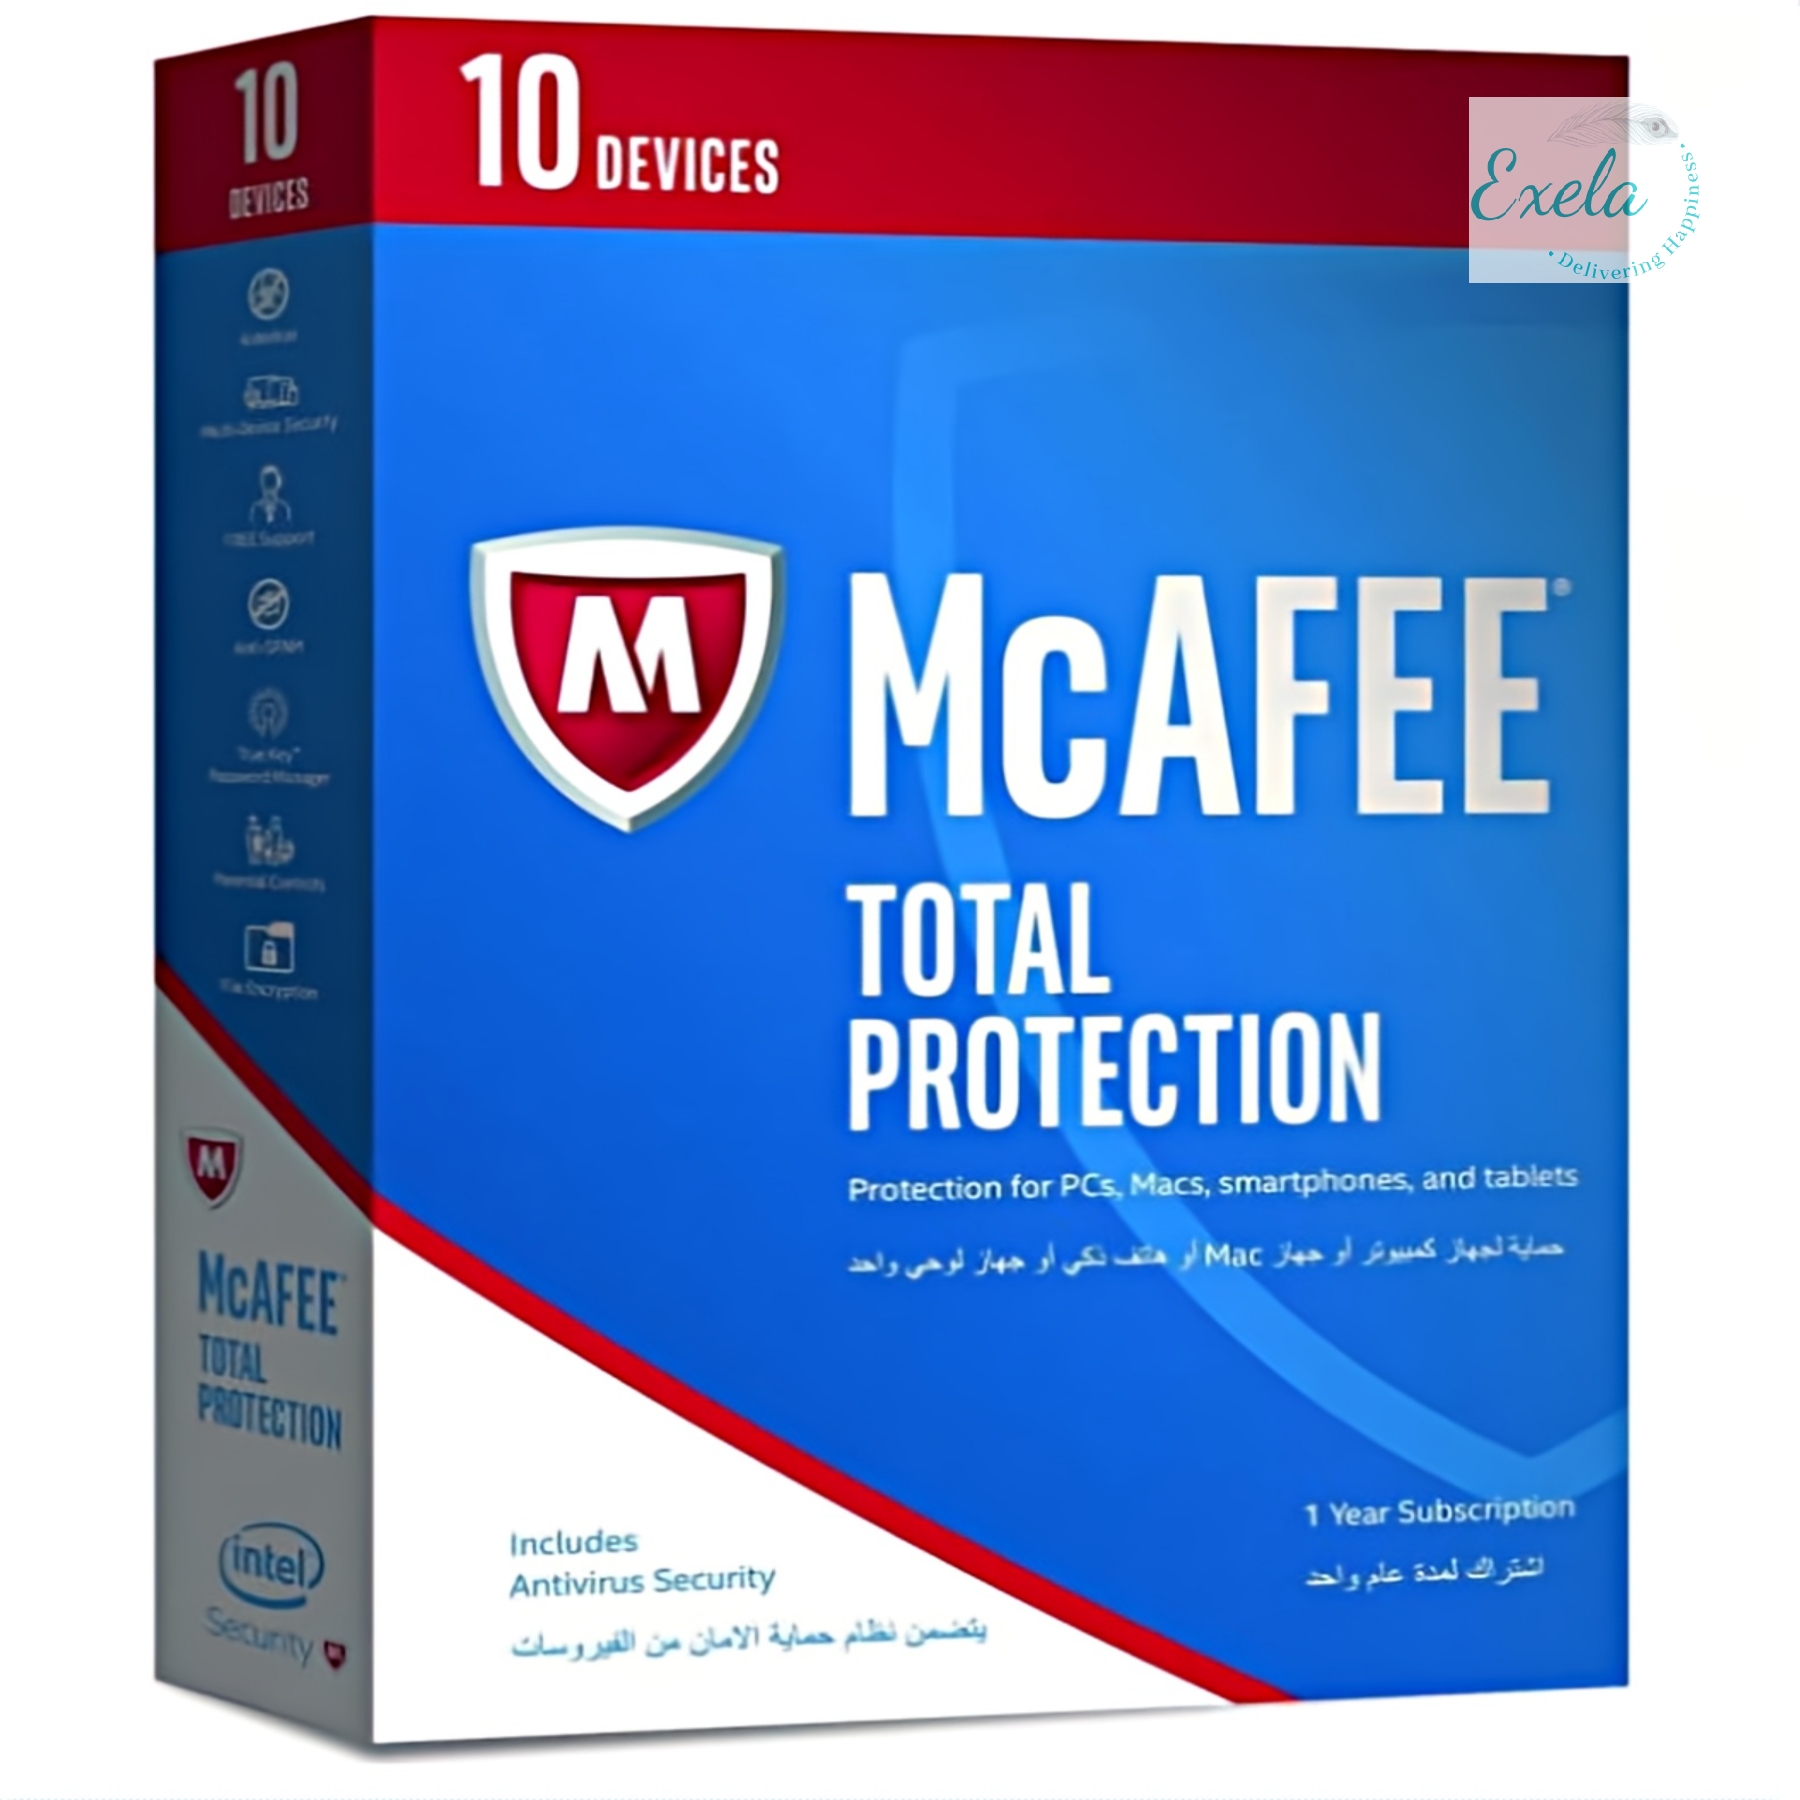 MCAFEE TOTAL PROTECTION 2017 - 10 USER